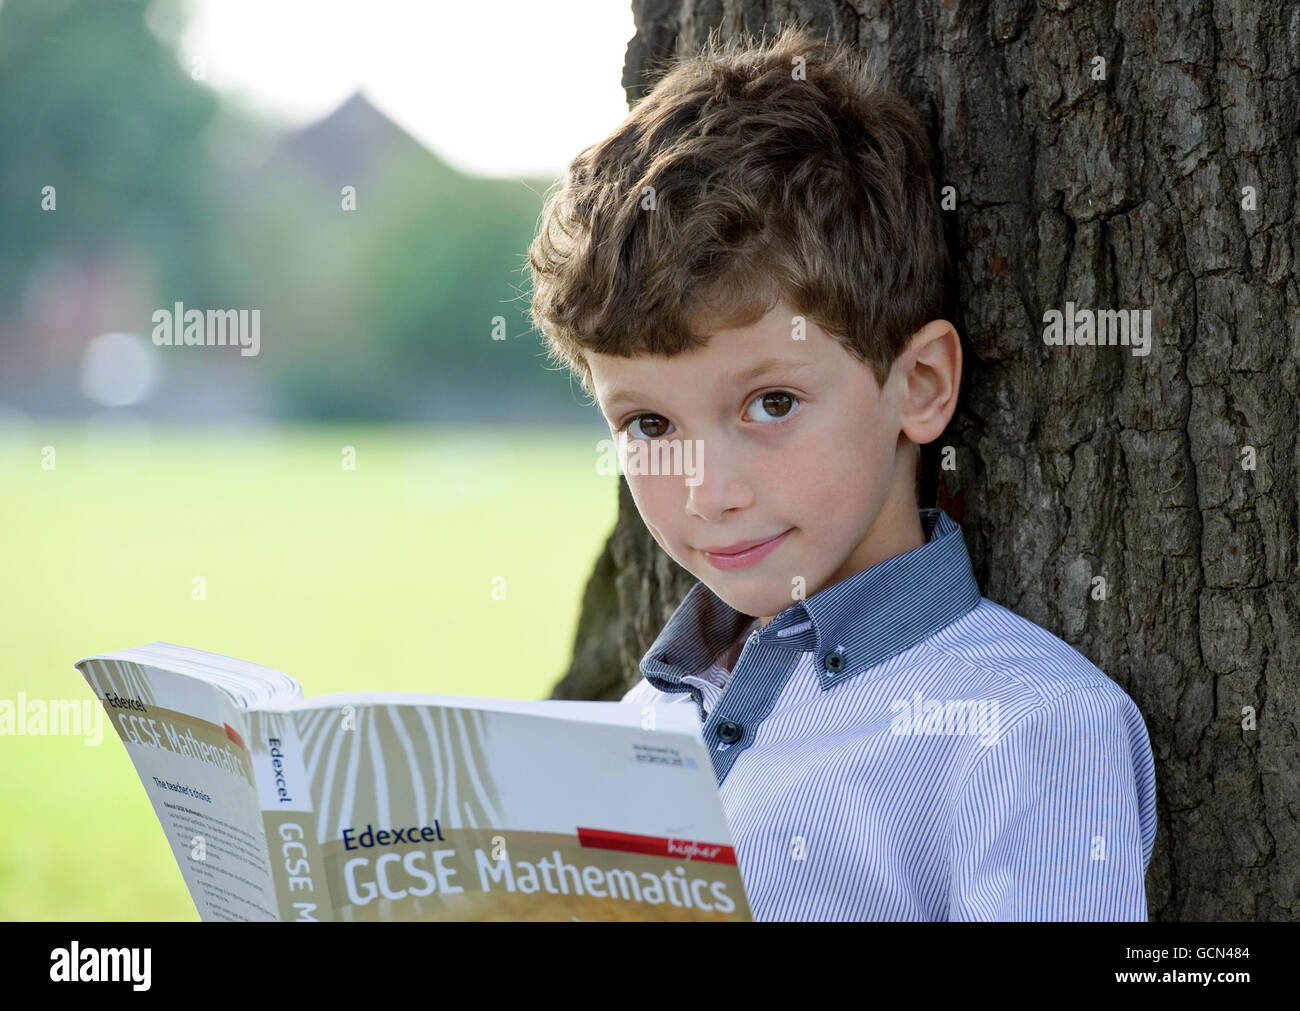 Gsce Results Stock Photo Alamy